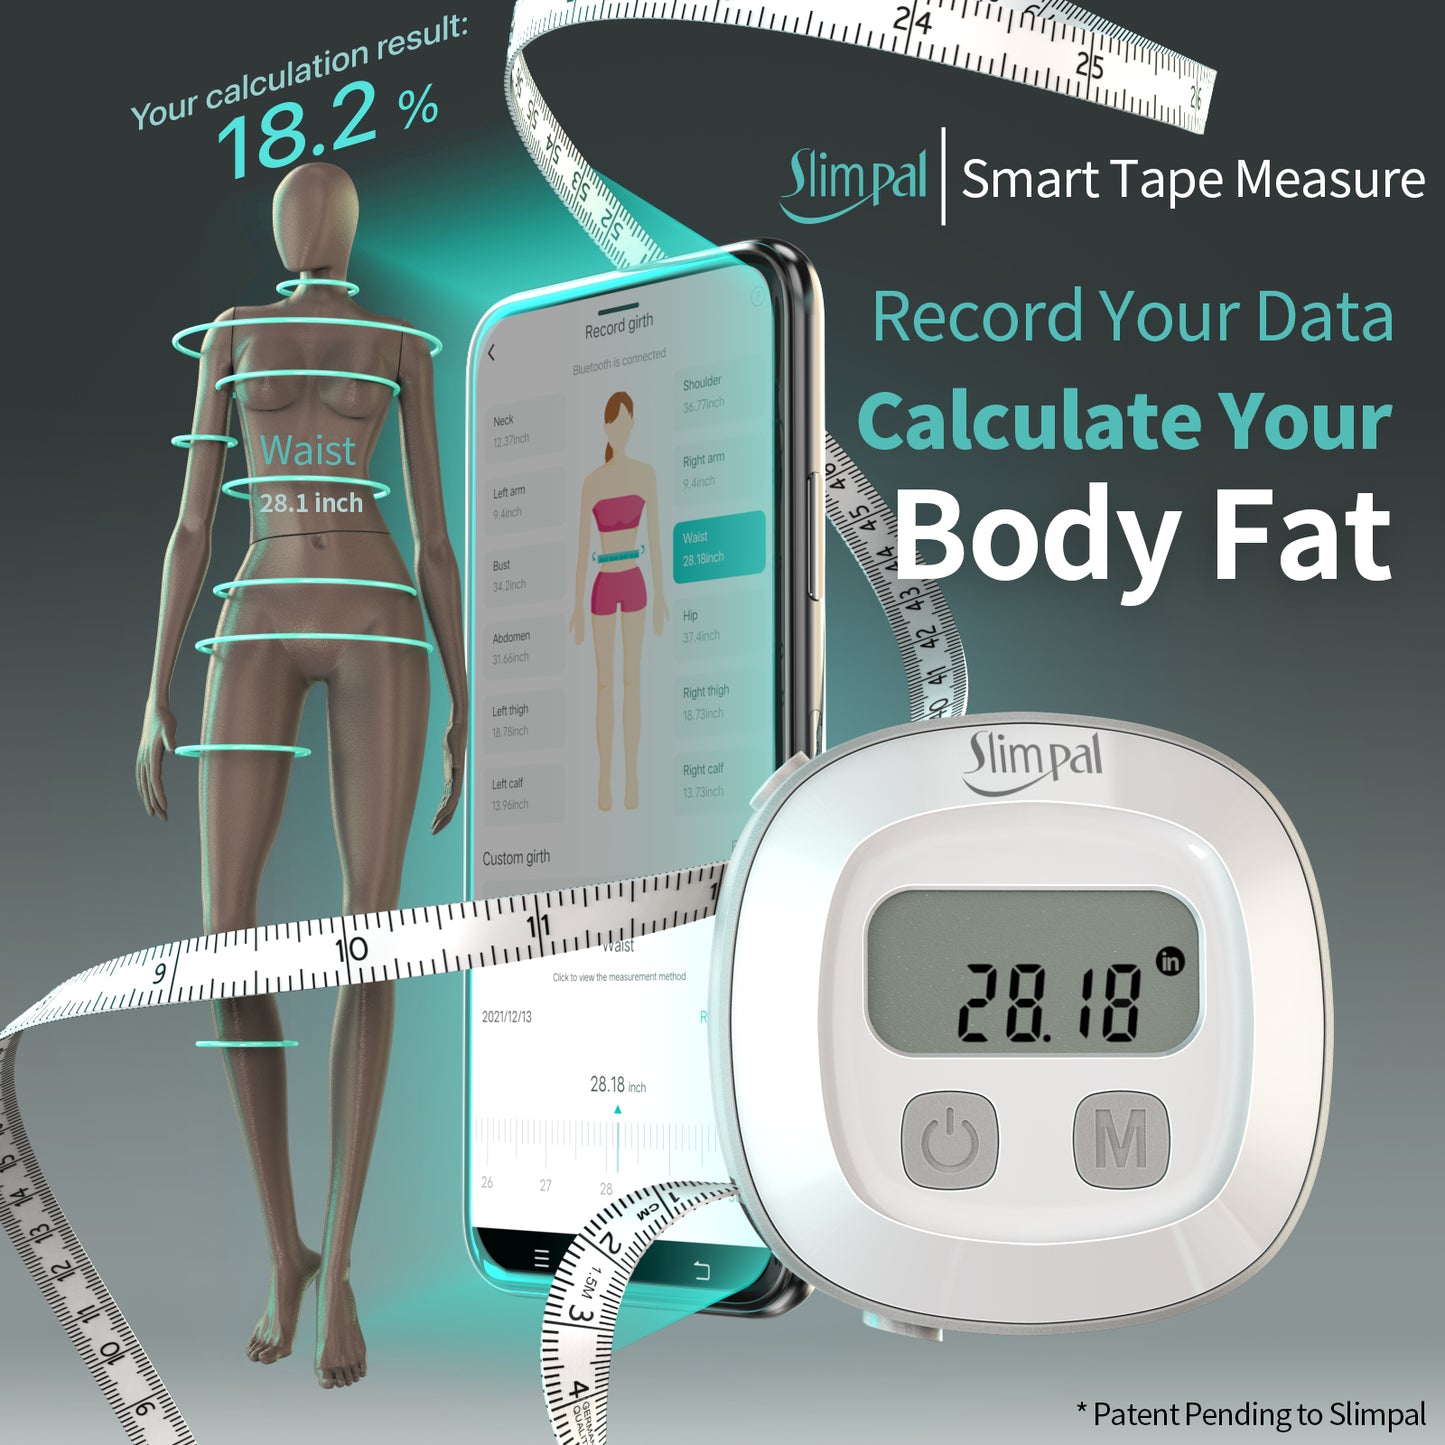 The Hot-Selling Smart Body Tape Measure Just Comes With A New Version!